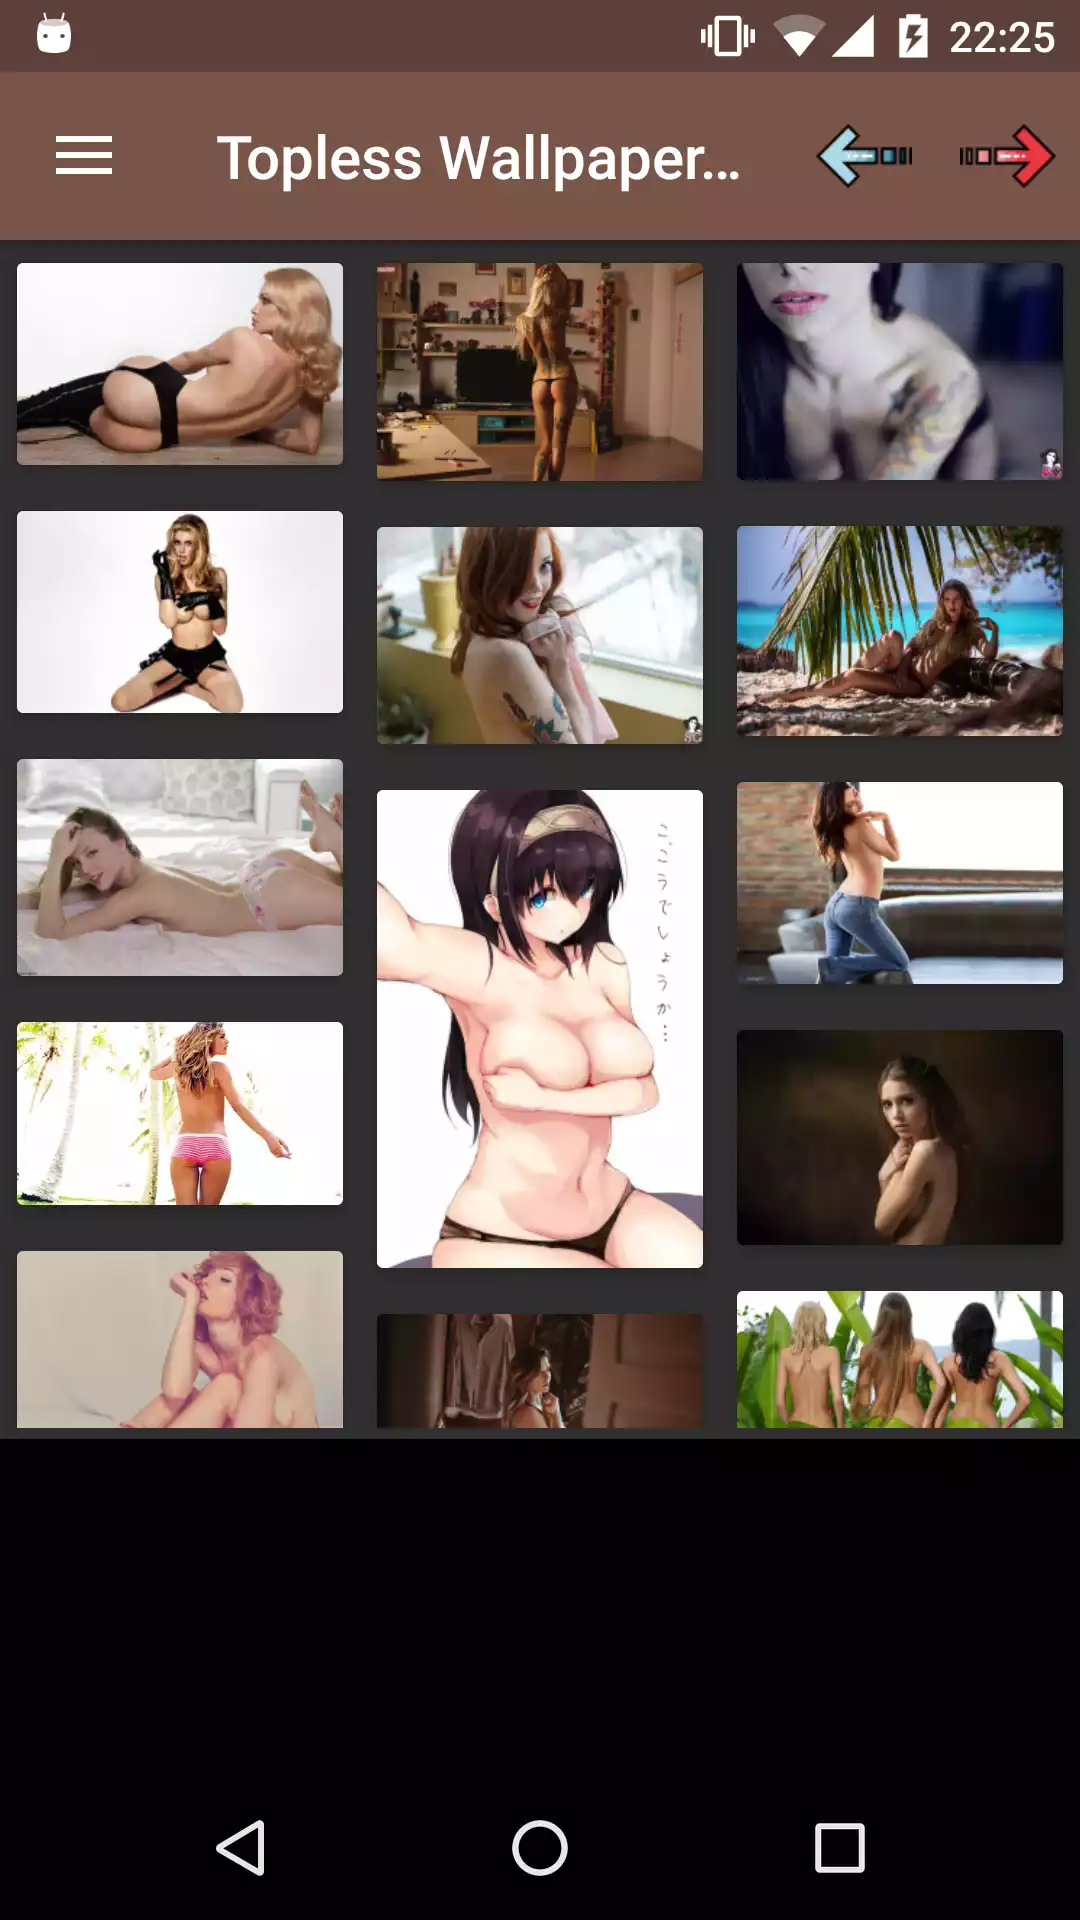 Topless backgrounds hot,backgrounds,tits,pornstars,app,erotic,sexy,teen,porn,best,ios,the,pics,image,pictures,hentai,nhentai,wallpapers,download,sexyteengalleries,henati,photo,pic,apps